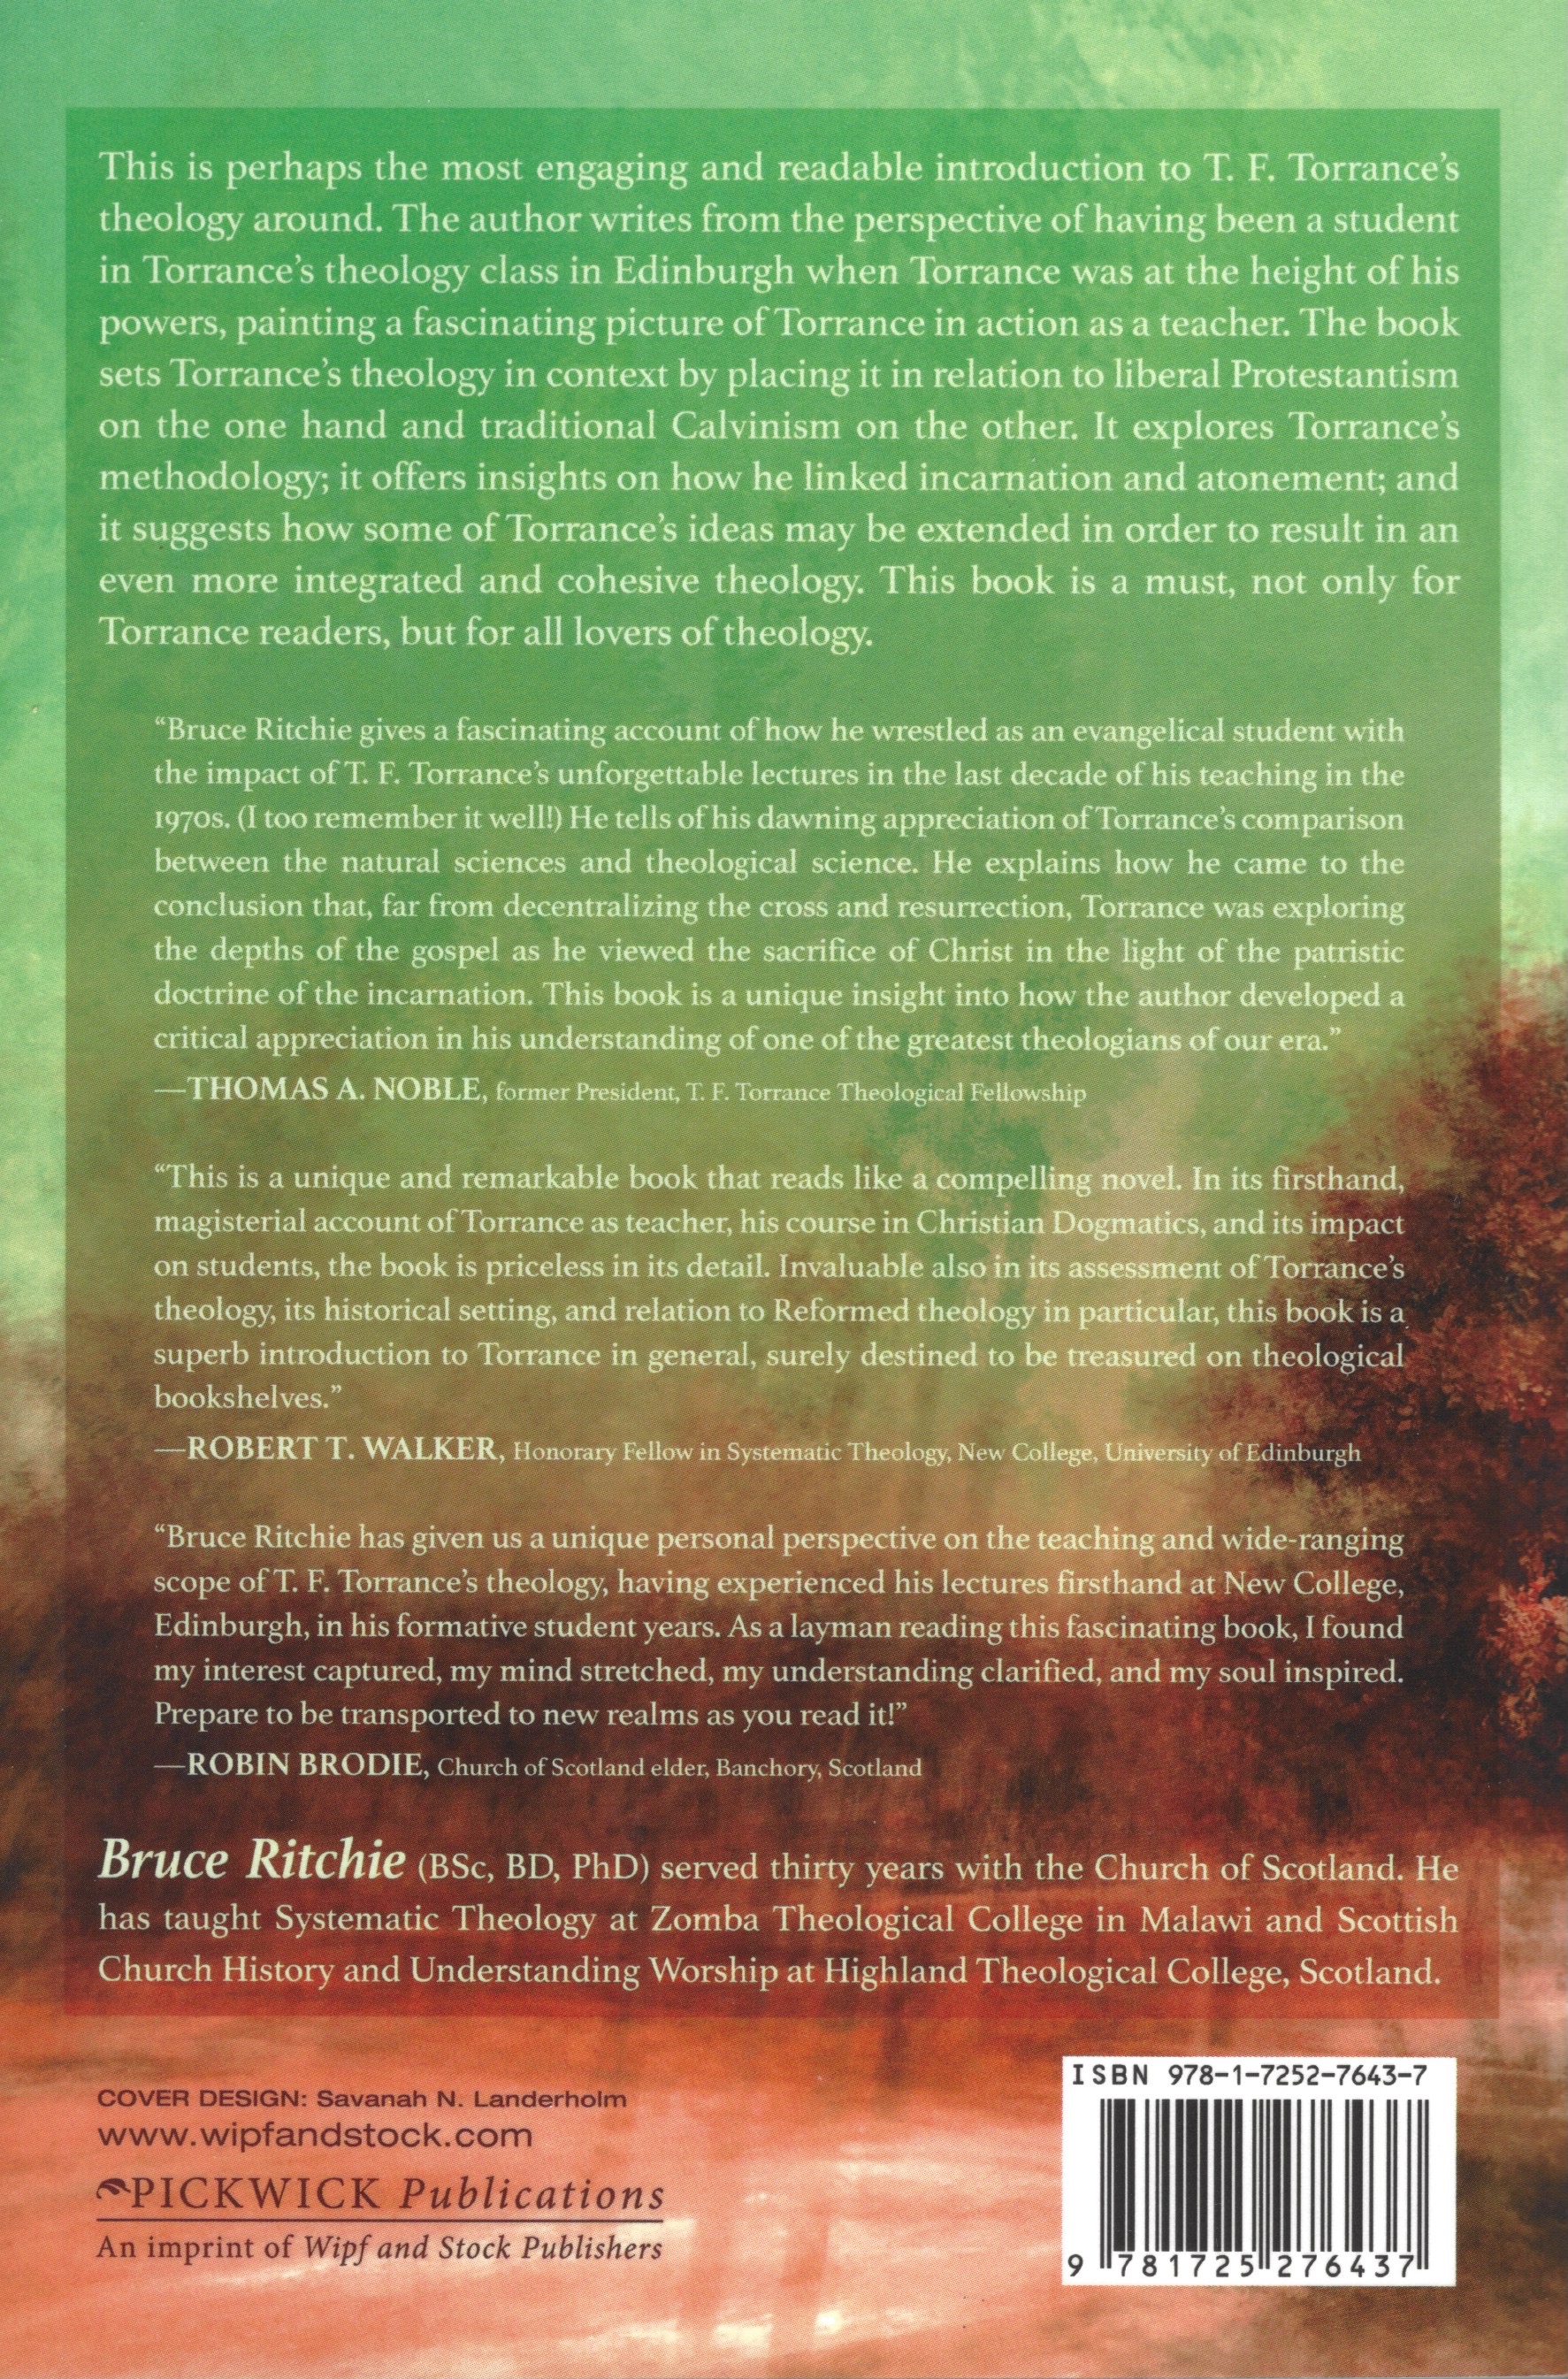 2021-BR-1 back cover